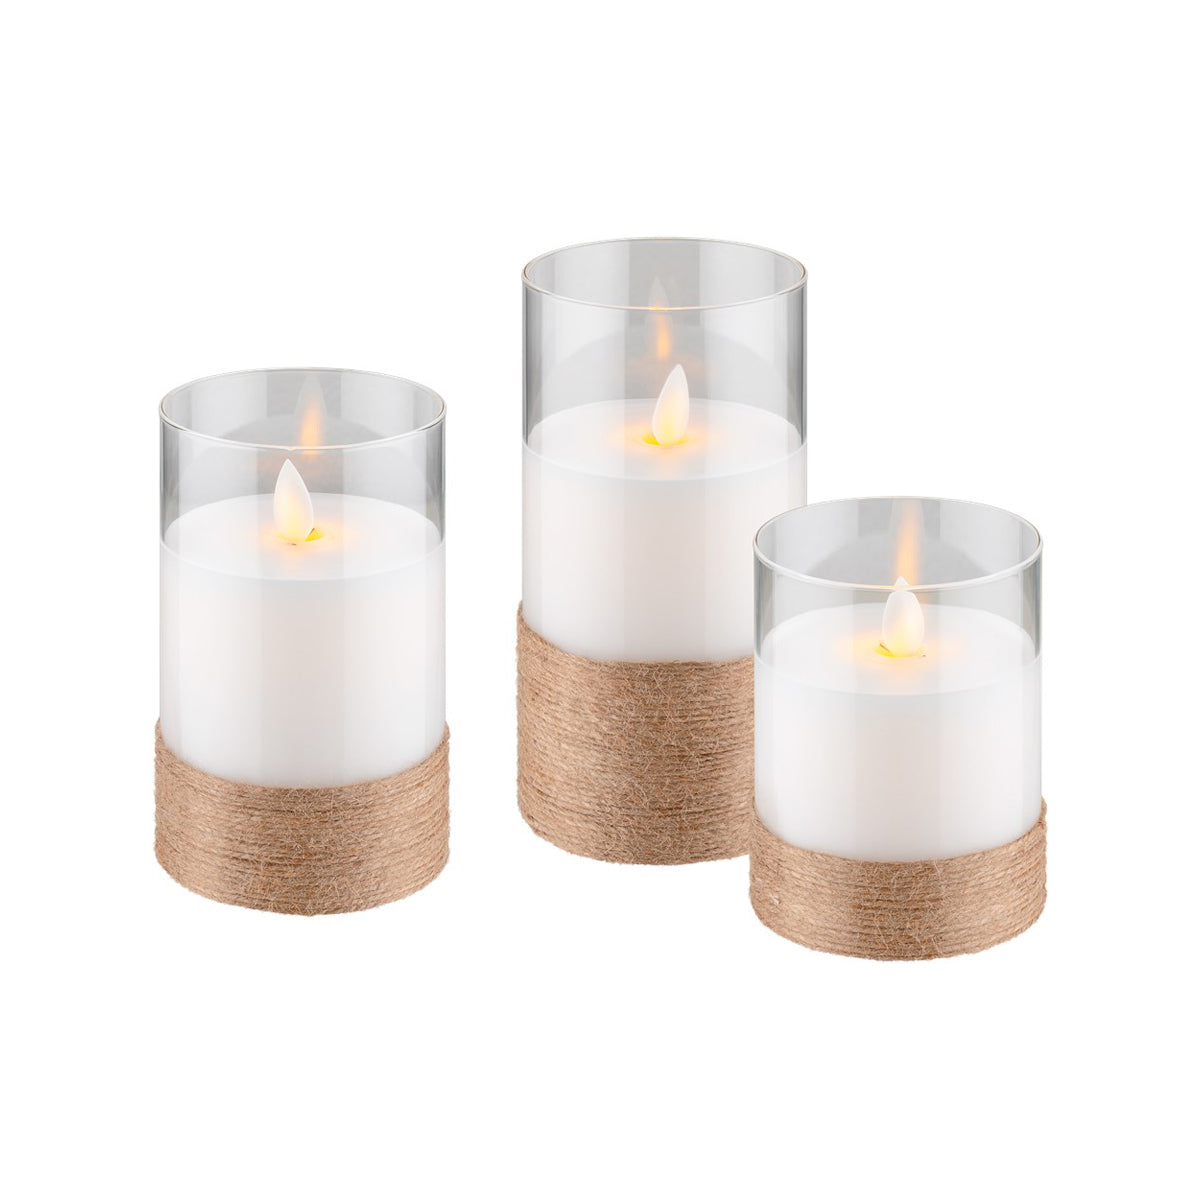 Goobay Set of 3 LED Wax Candles in Glass - White.